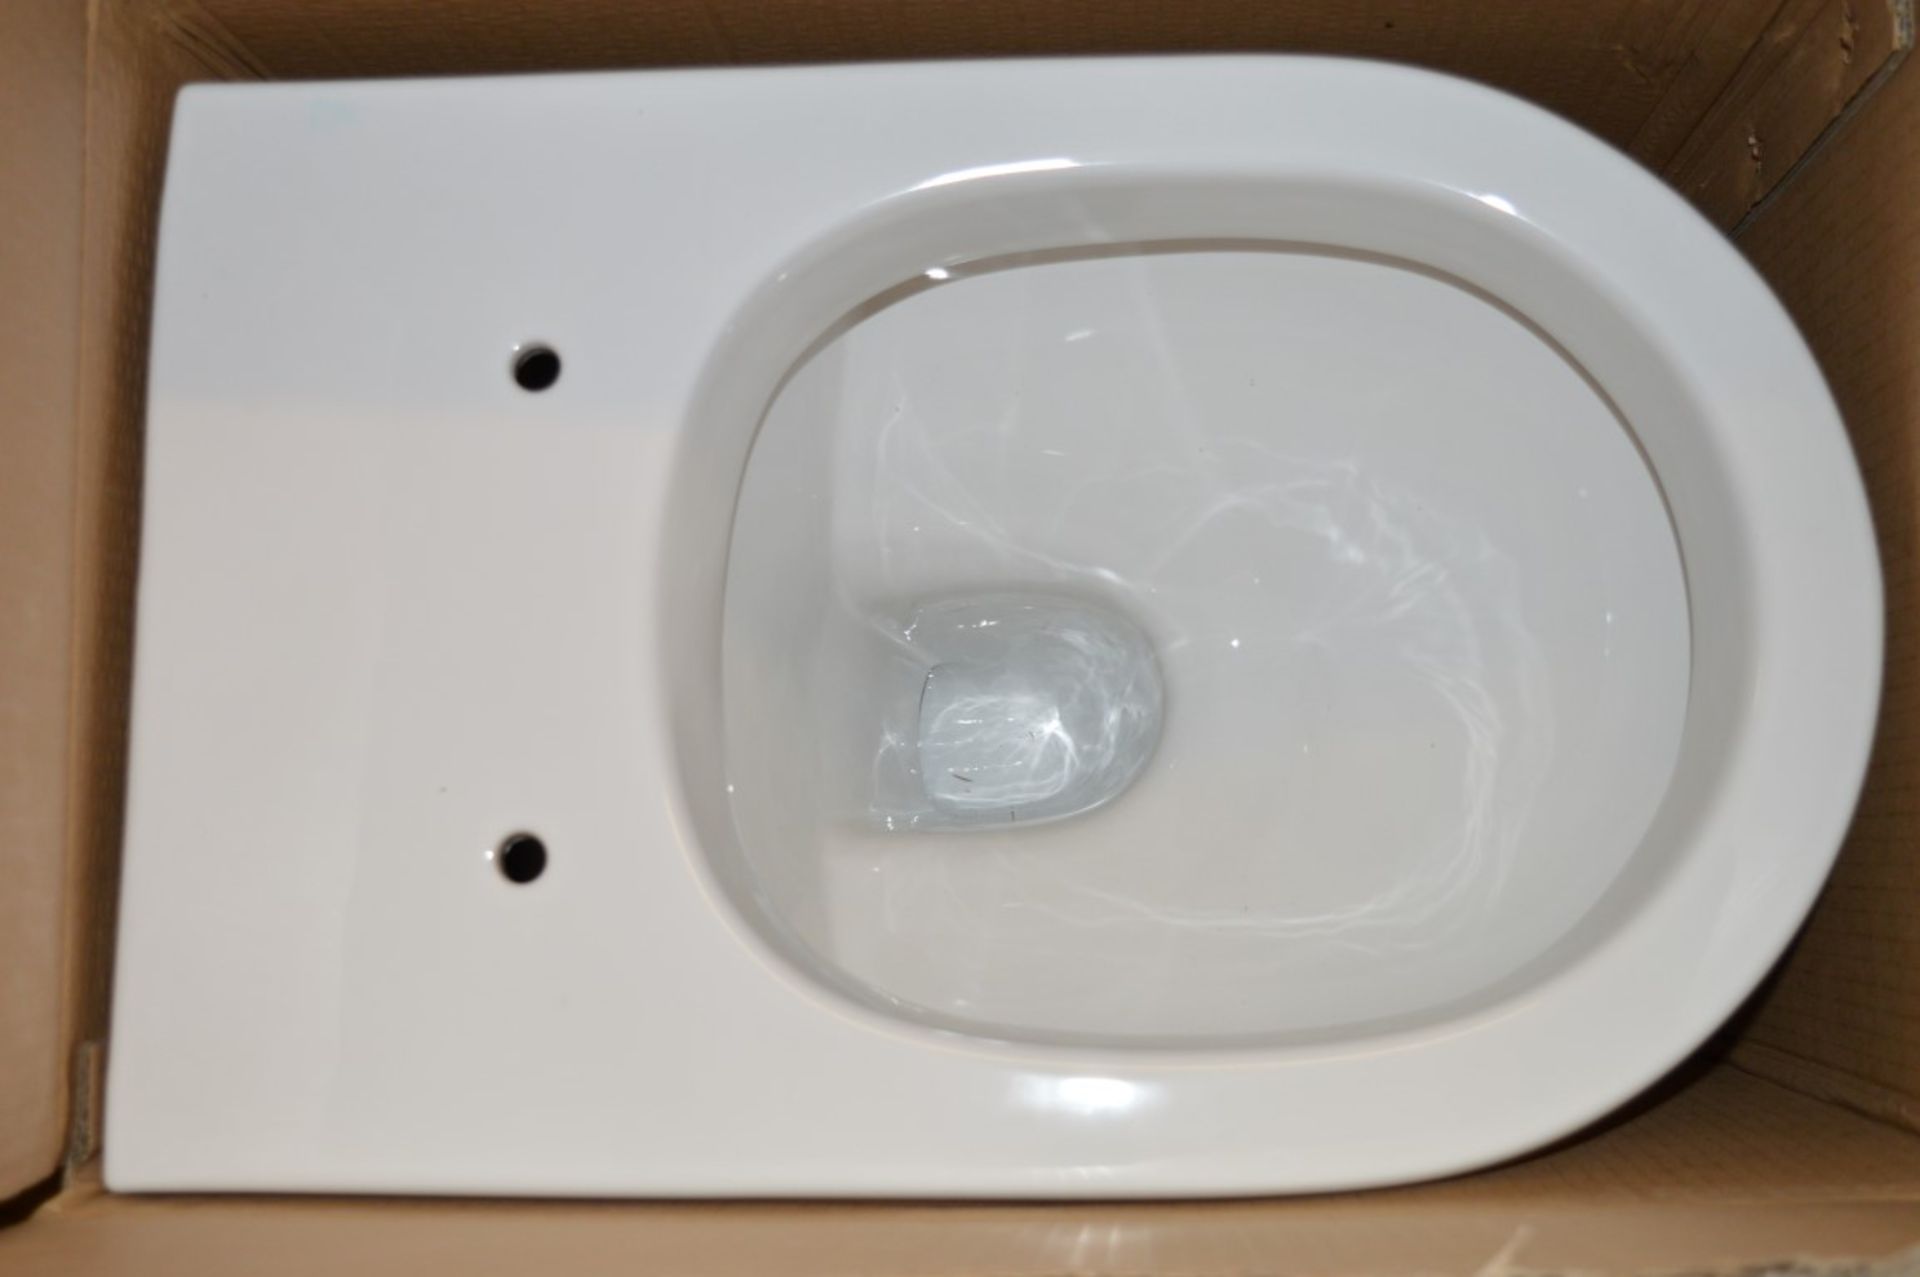 10 x Vogue Zoe Back to Wall Toilet Pans with Soft Close Seats - Vogue Bathrooms - Brand New and - Image 2 of 3